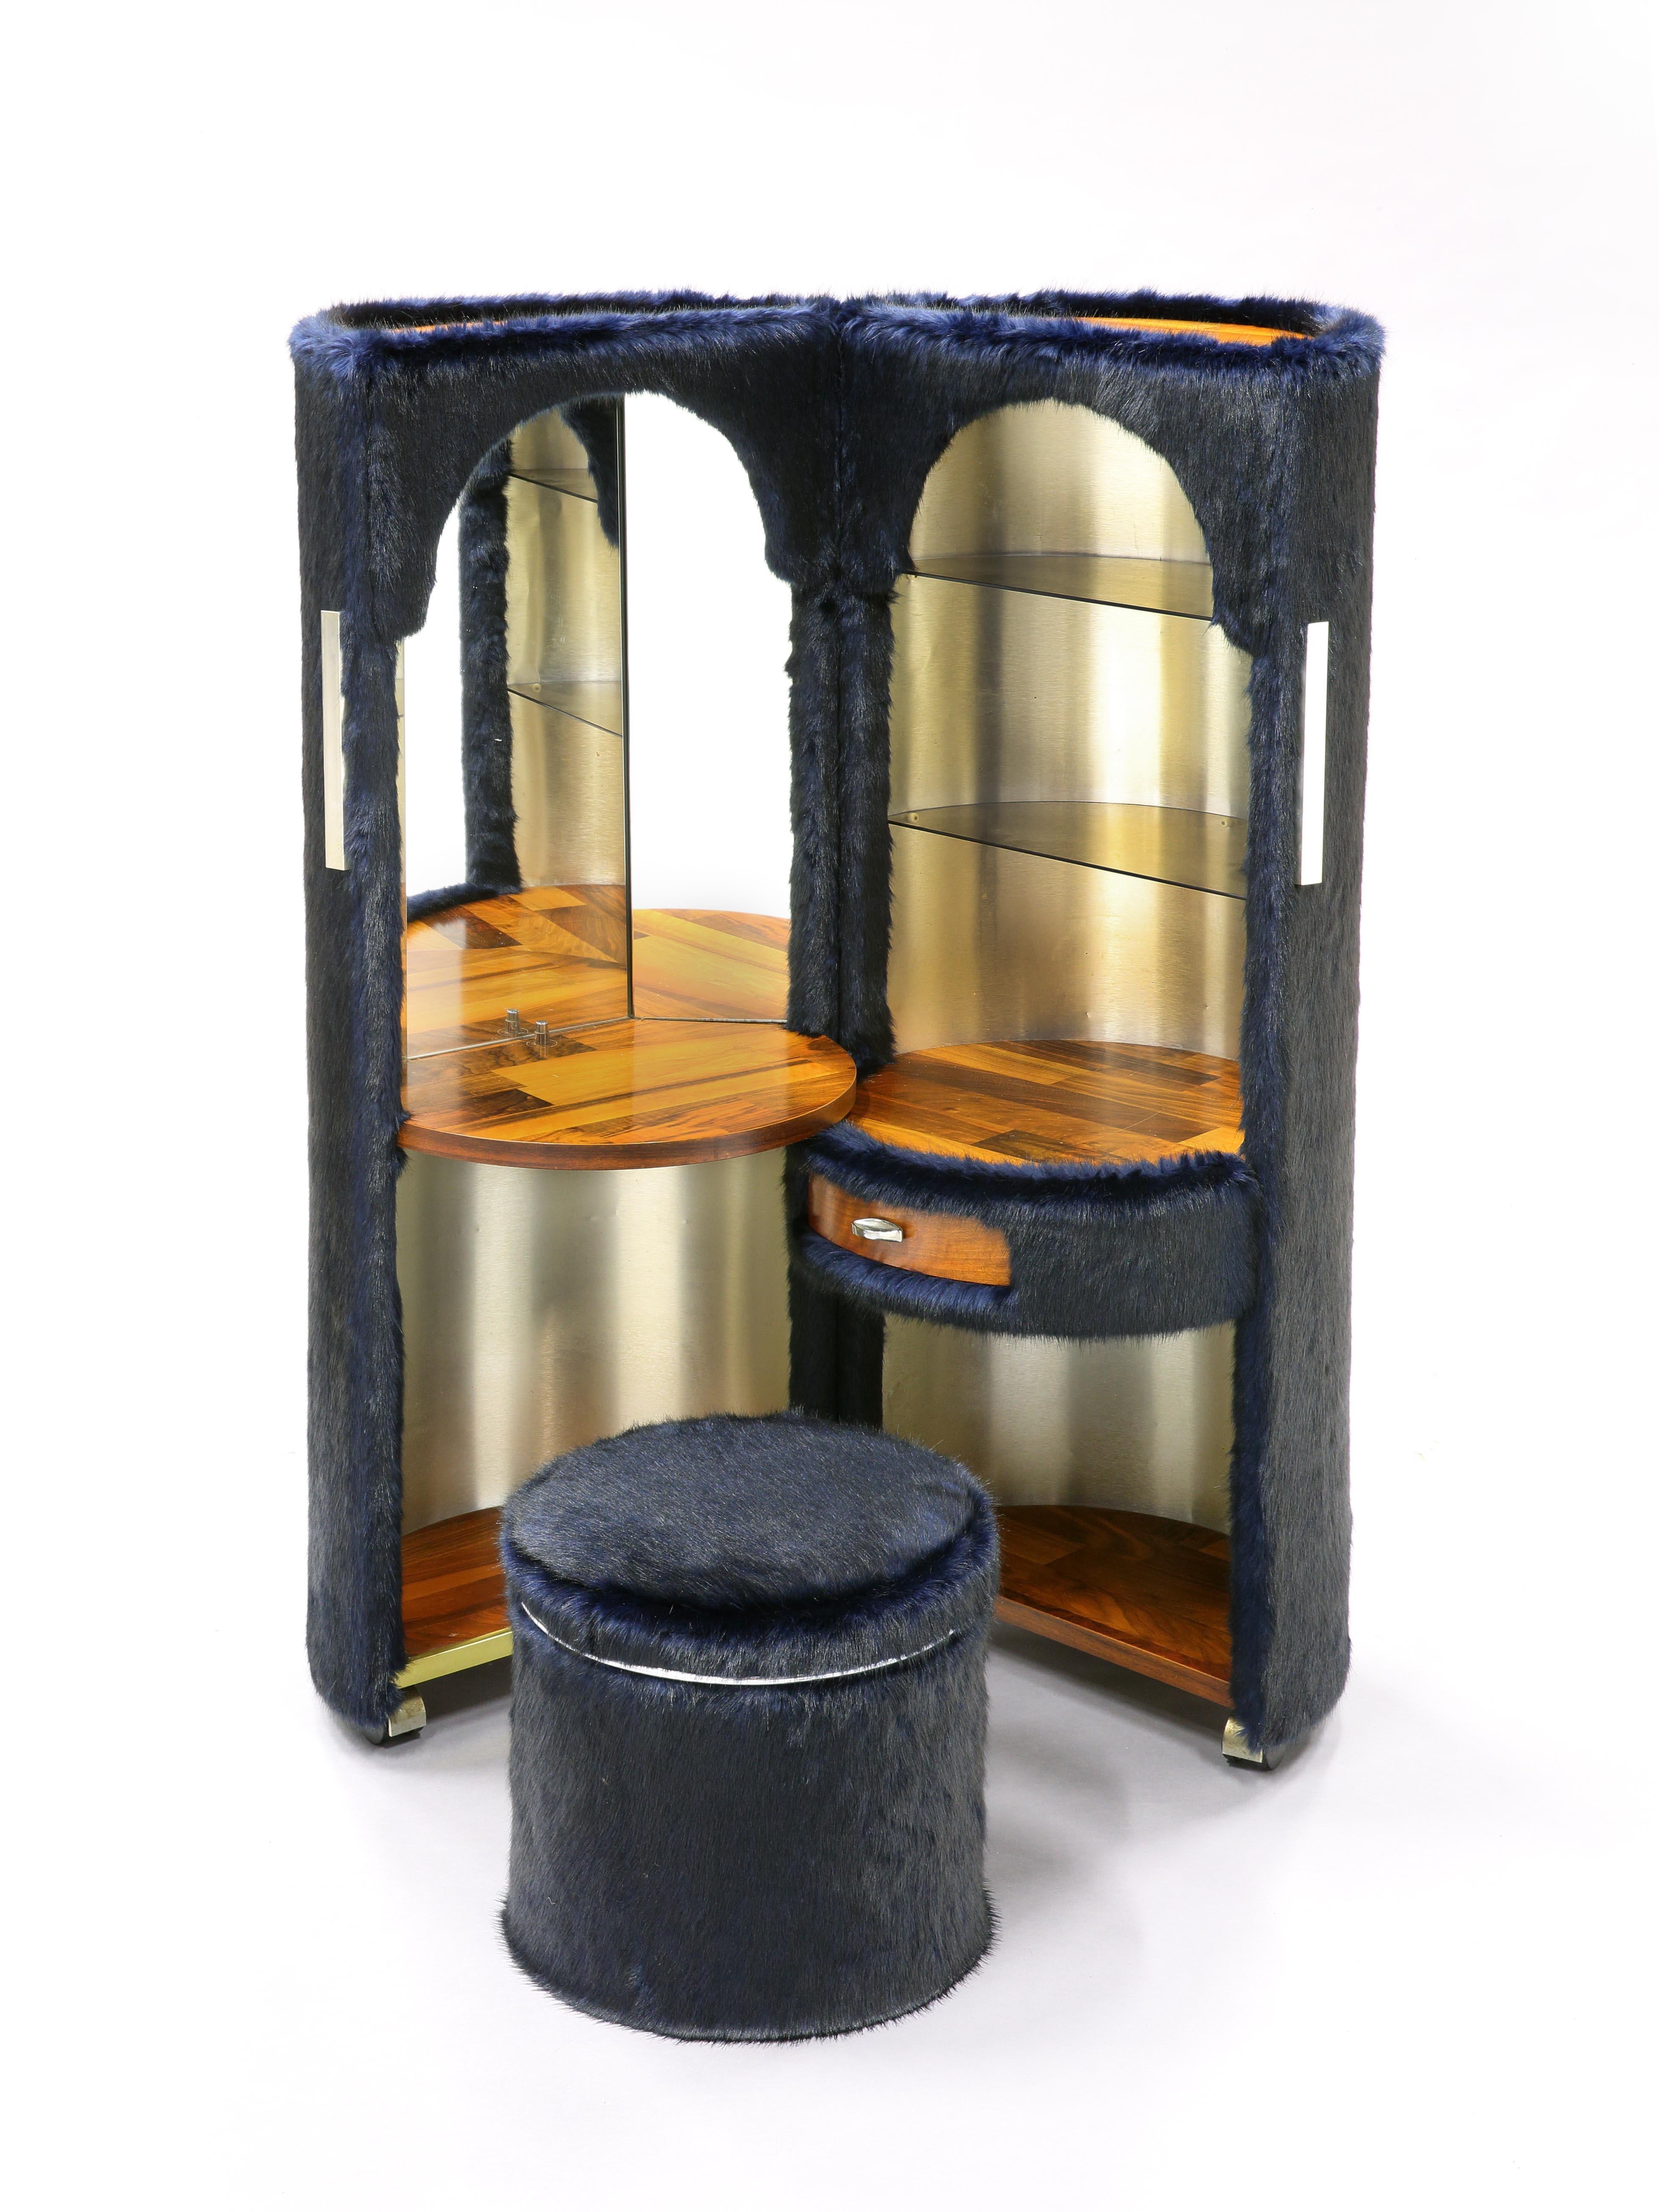 Luigi Massoni, Space Age, mobile, capsule, dressing or vanity or bar/drinks cabinet and matching stool/ottoman, special order in luxury, long pile, navy faux fur, 1970s

An iconic design from the 1970s and a really fun, funky, dressing/vanity table